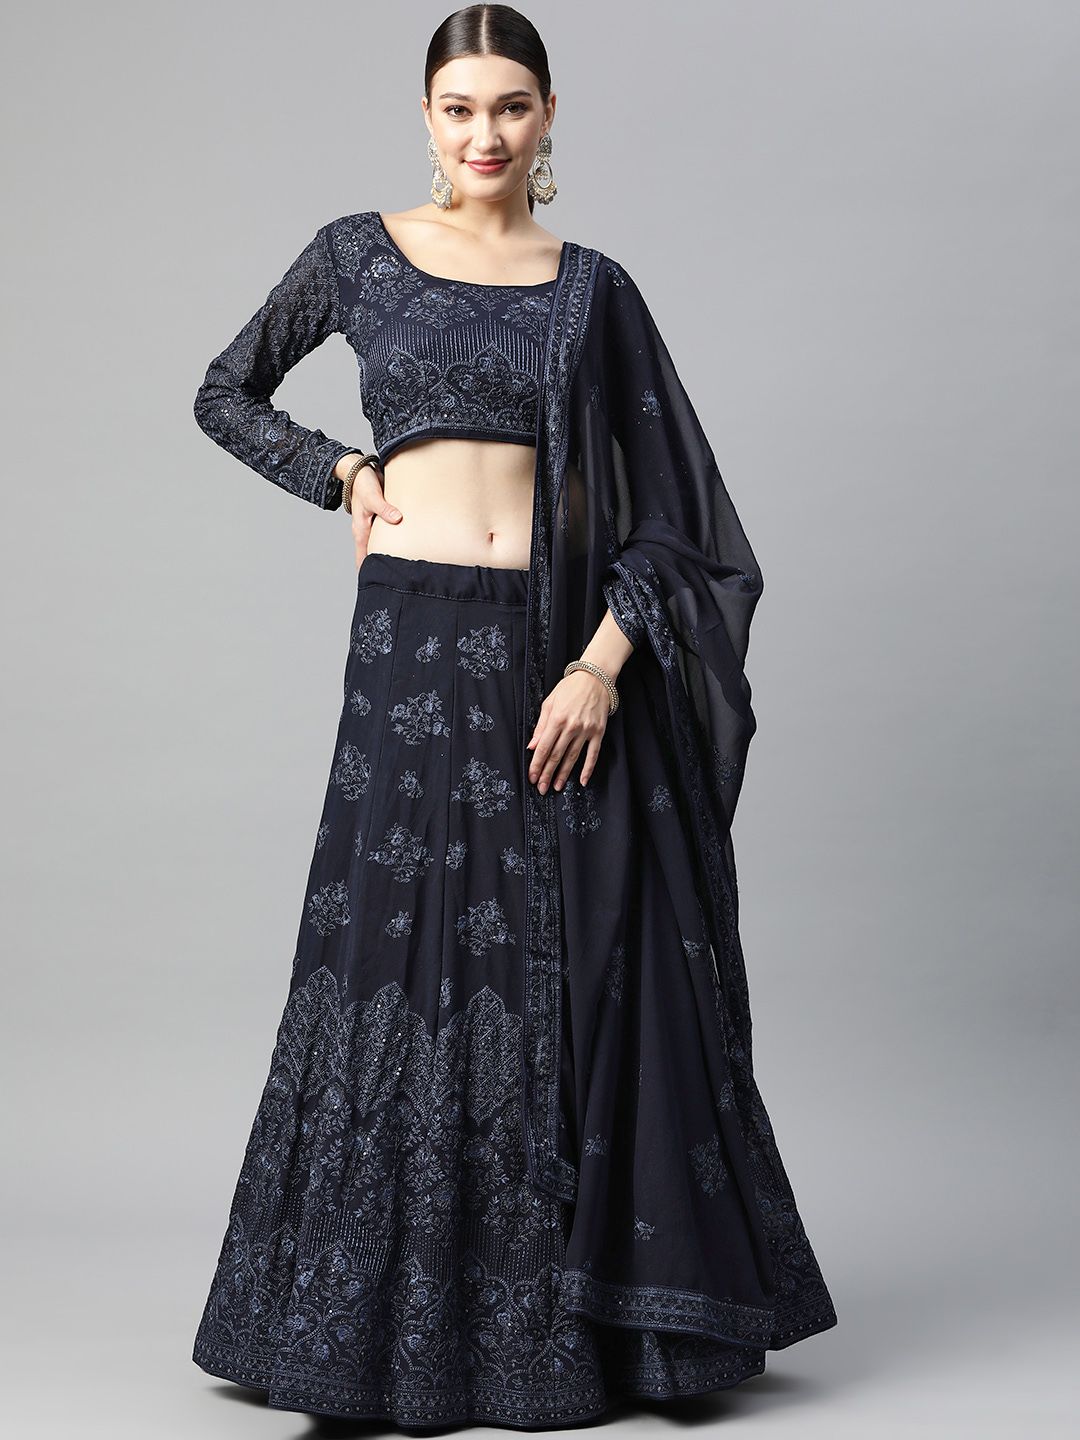 Divine International Trading Co Navy Blue Embroidered Sequinned Lehenga Choli With Dupatta Price in India